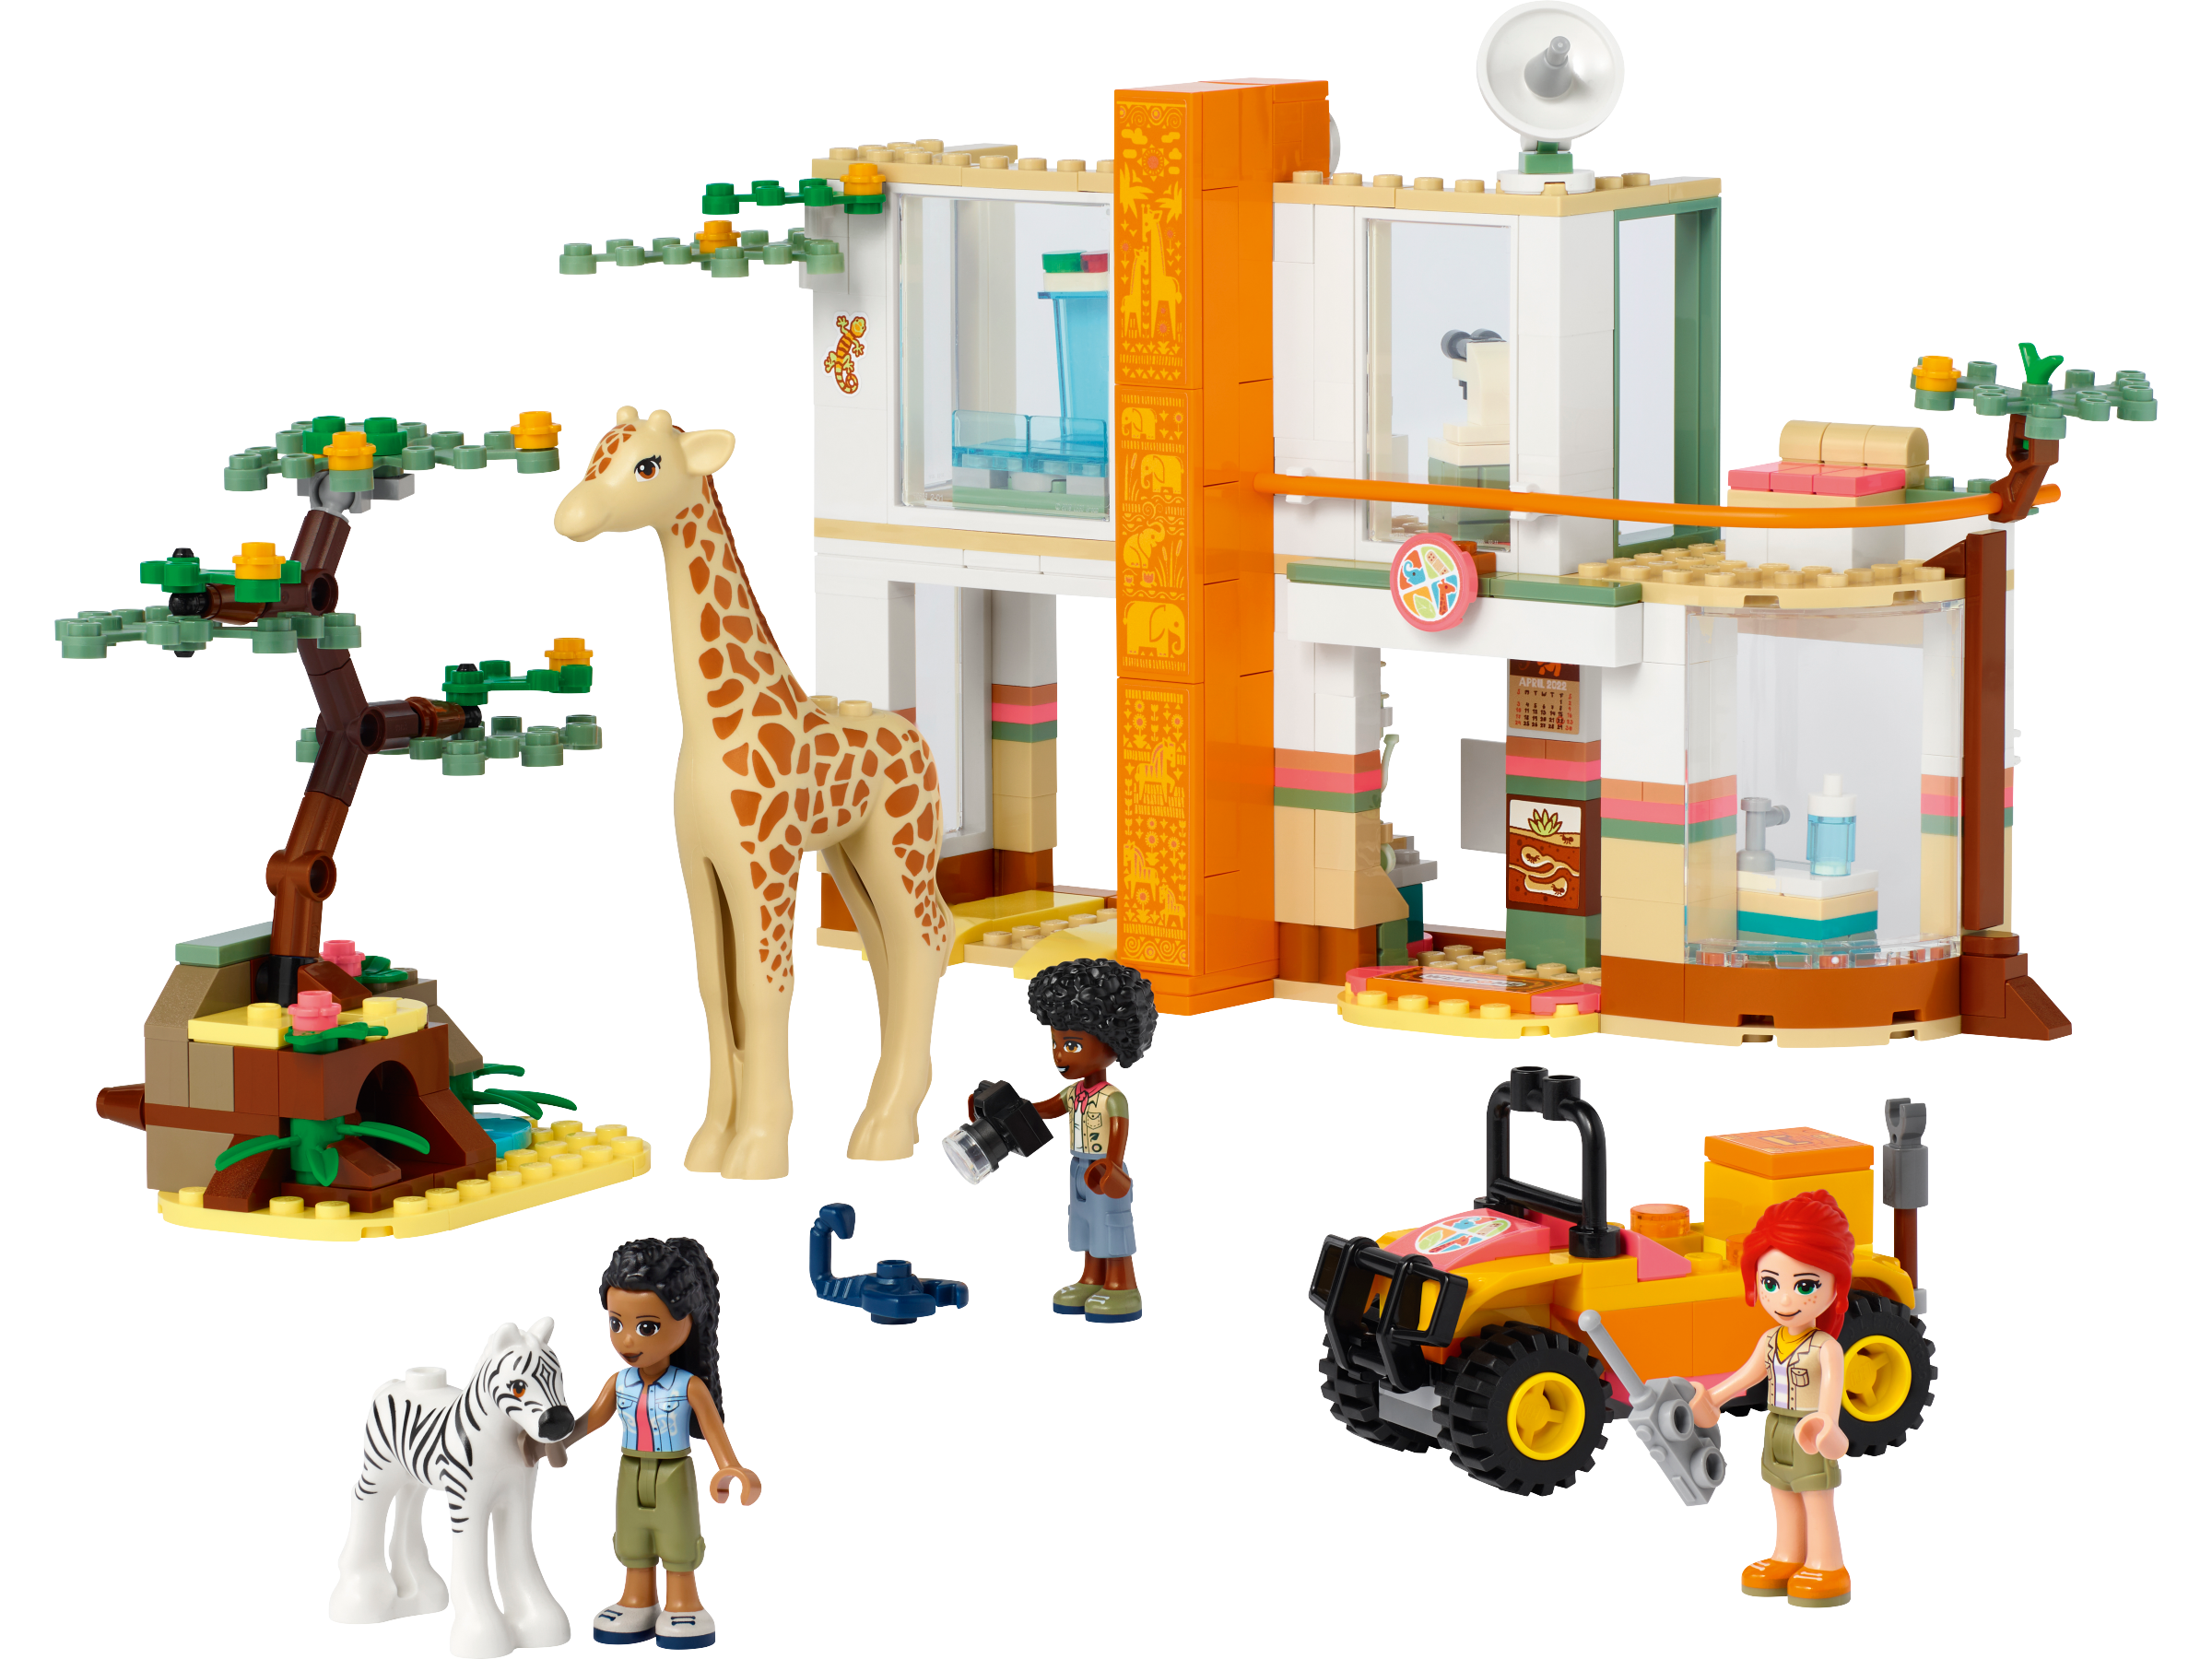 Mia's Wildlife Rescue 41717 | Friends | Buy online at the Official LEGO®  Shop US